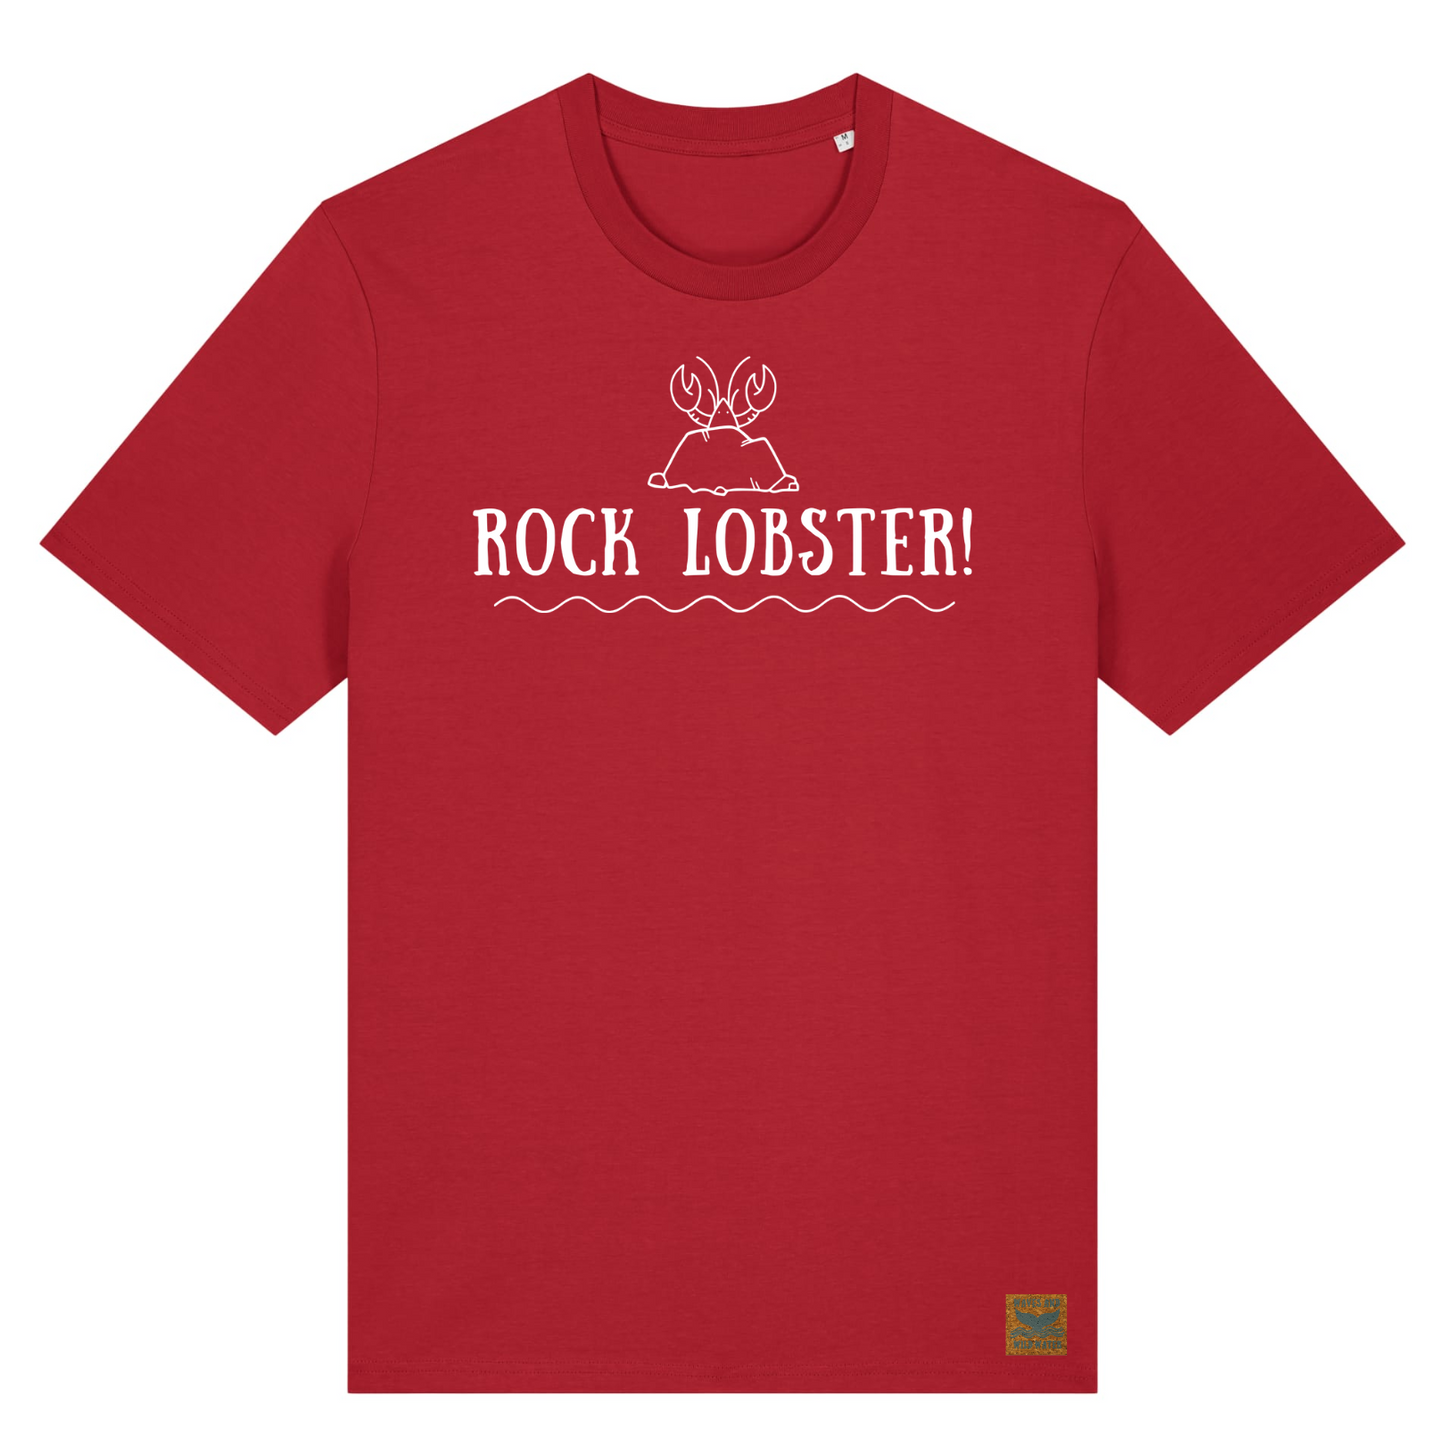 Bright red t-shirt with the image of our cheeky lobster poking out from behind a rock printed on the front in white chemical free ink. The text Rock Lobster is also printed under the image, as a nod to the song by the B52's. This tee is from the Waves and Wild Water Seaside Rock collection and is a great addition to any wild swimmers wardrobe.